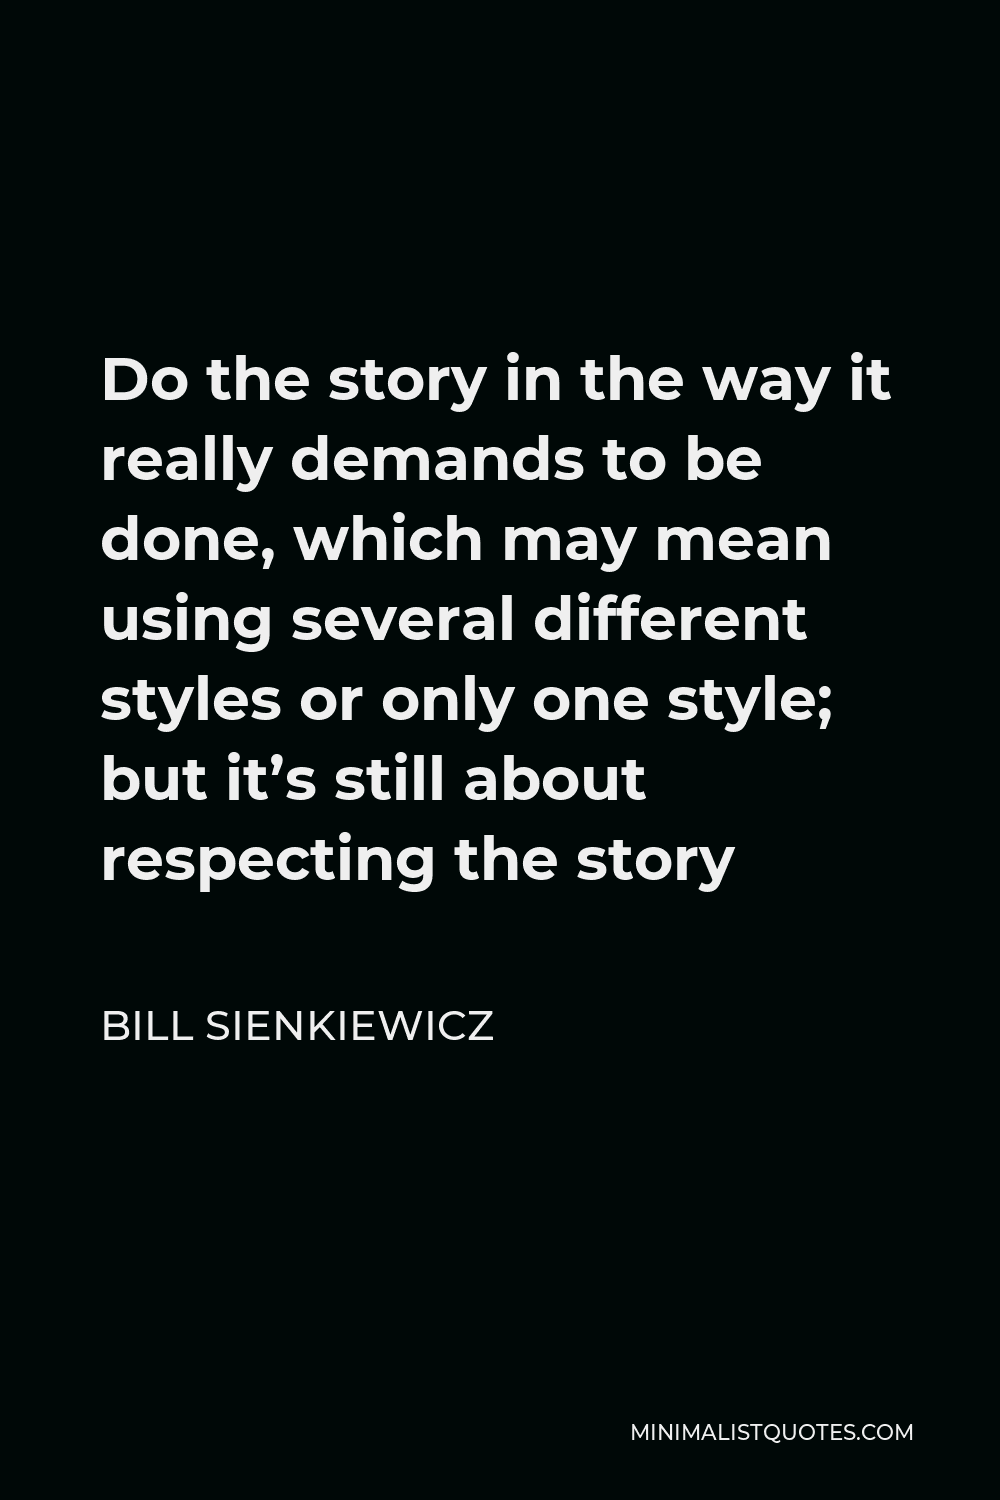 Bill Sienkiewicz Quote - Do the story in the way it really demands to be done, which may mean using several different styles or only one style; but it’s still about respecting the story